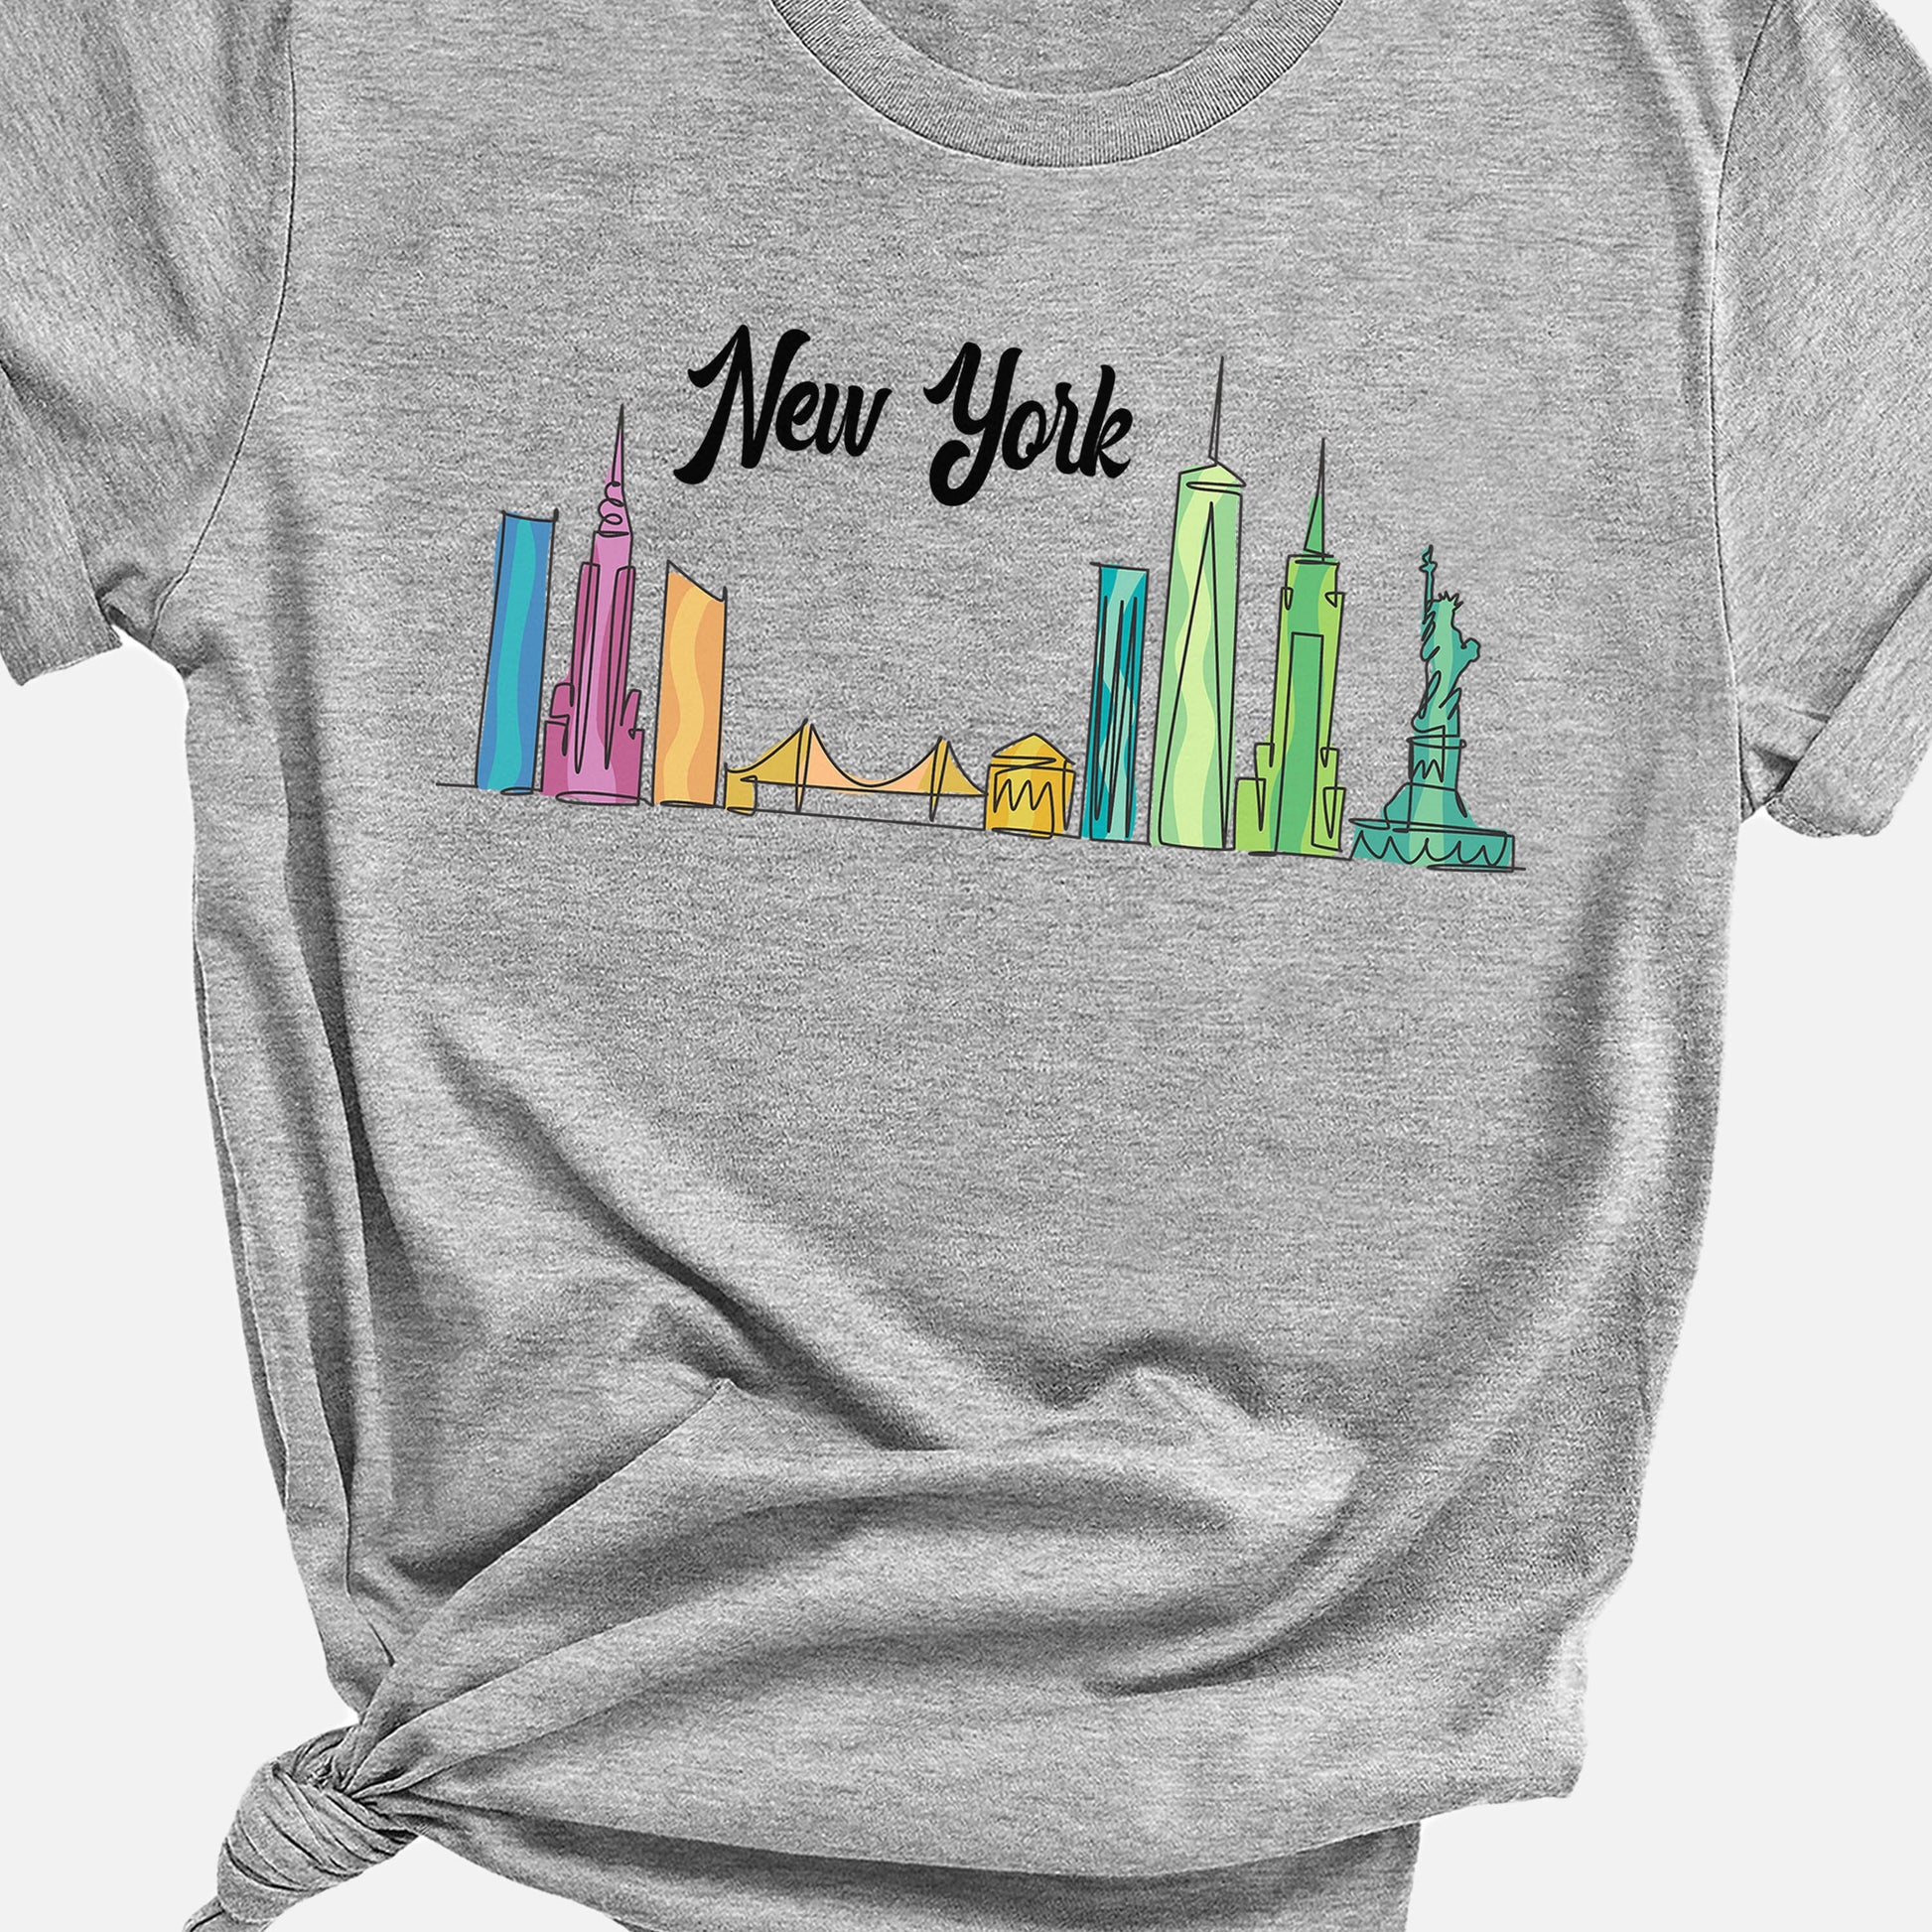 a t - shirt with the new york skyline drawn on it